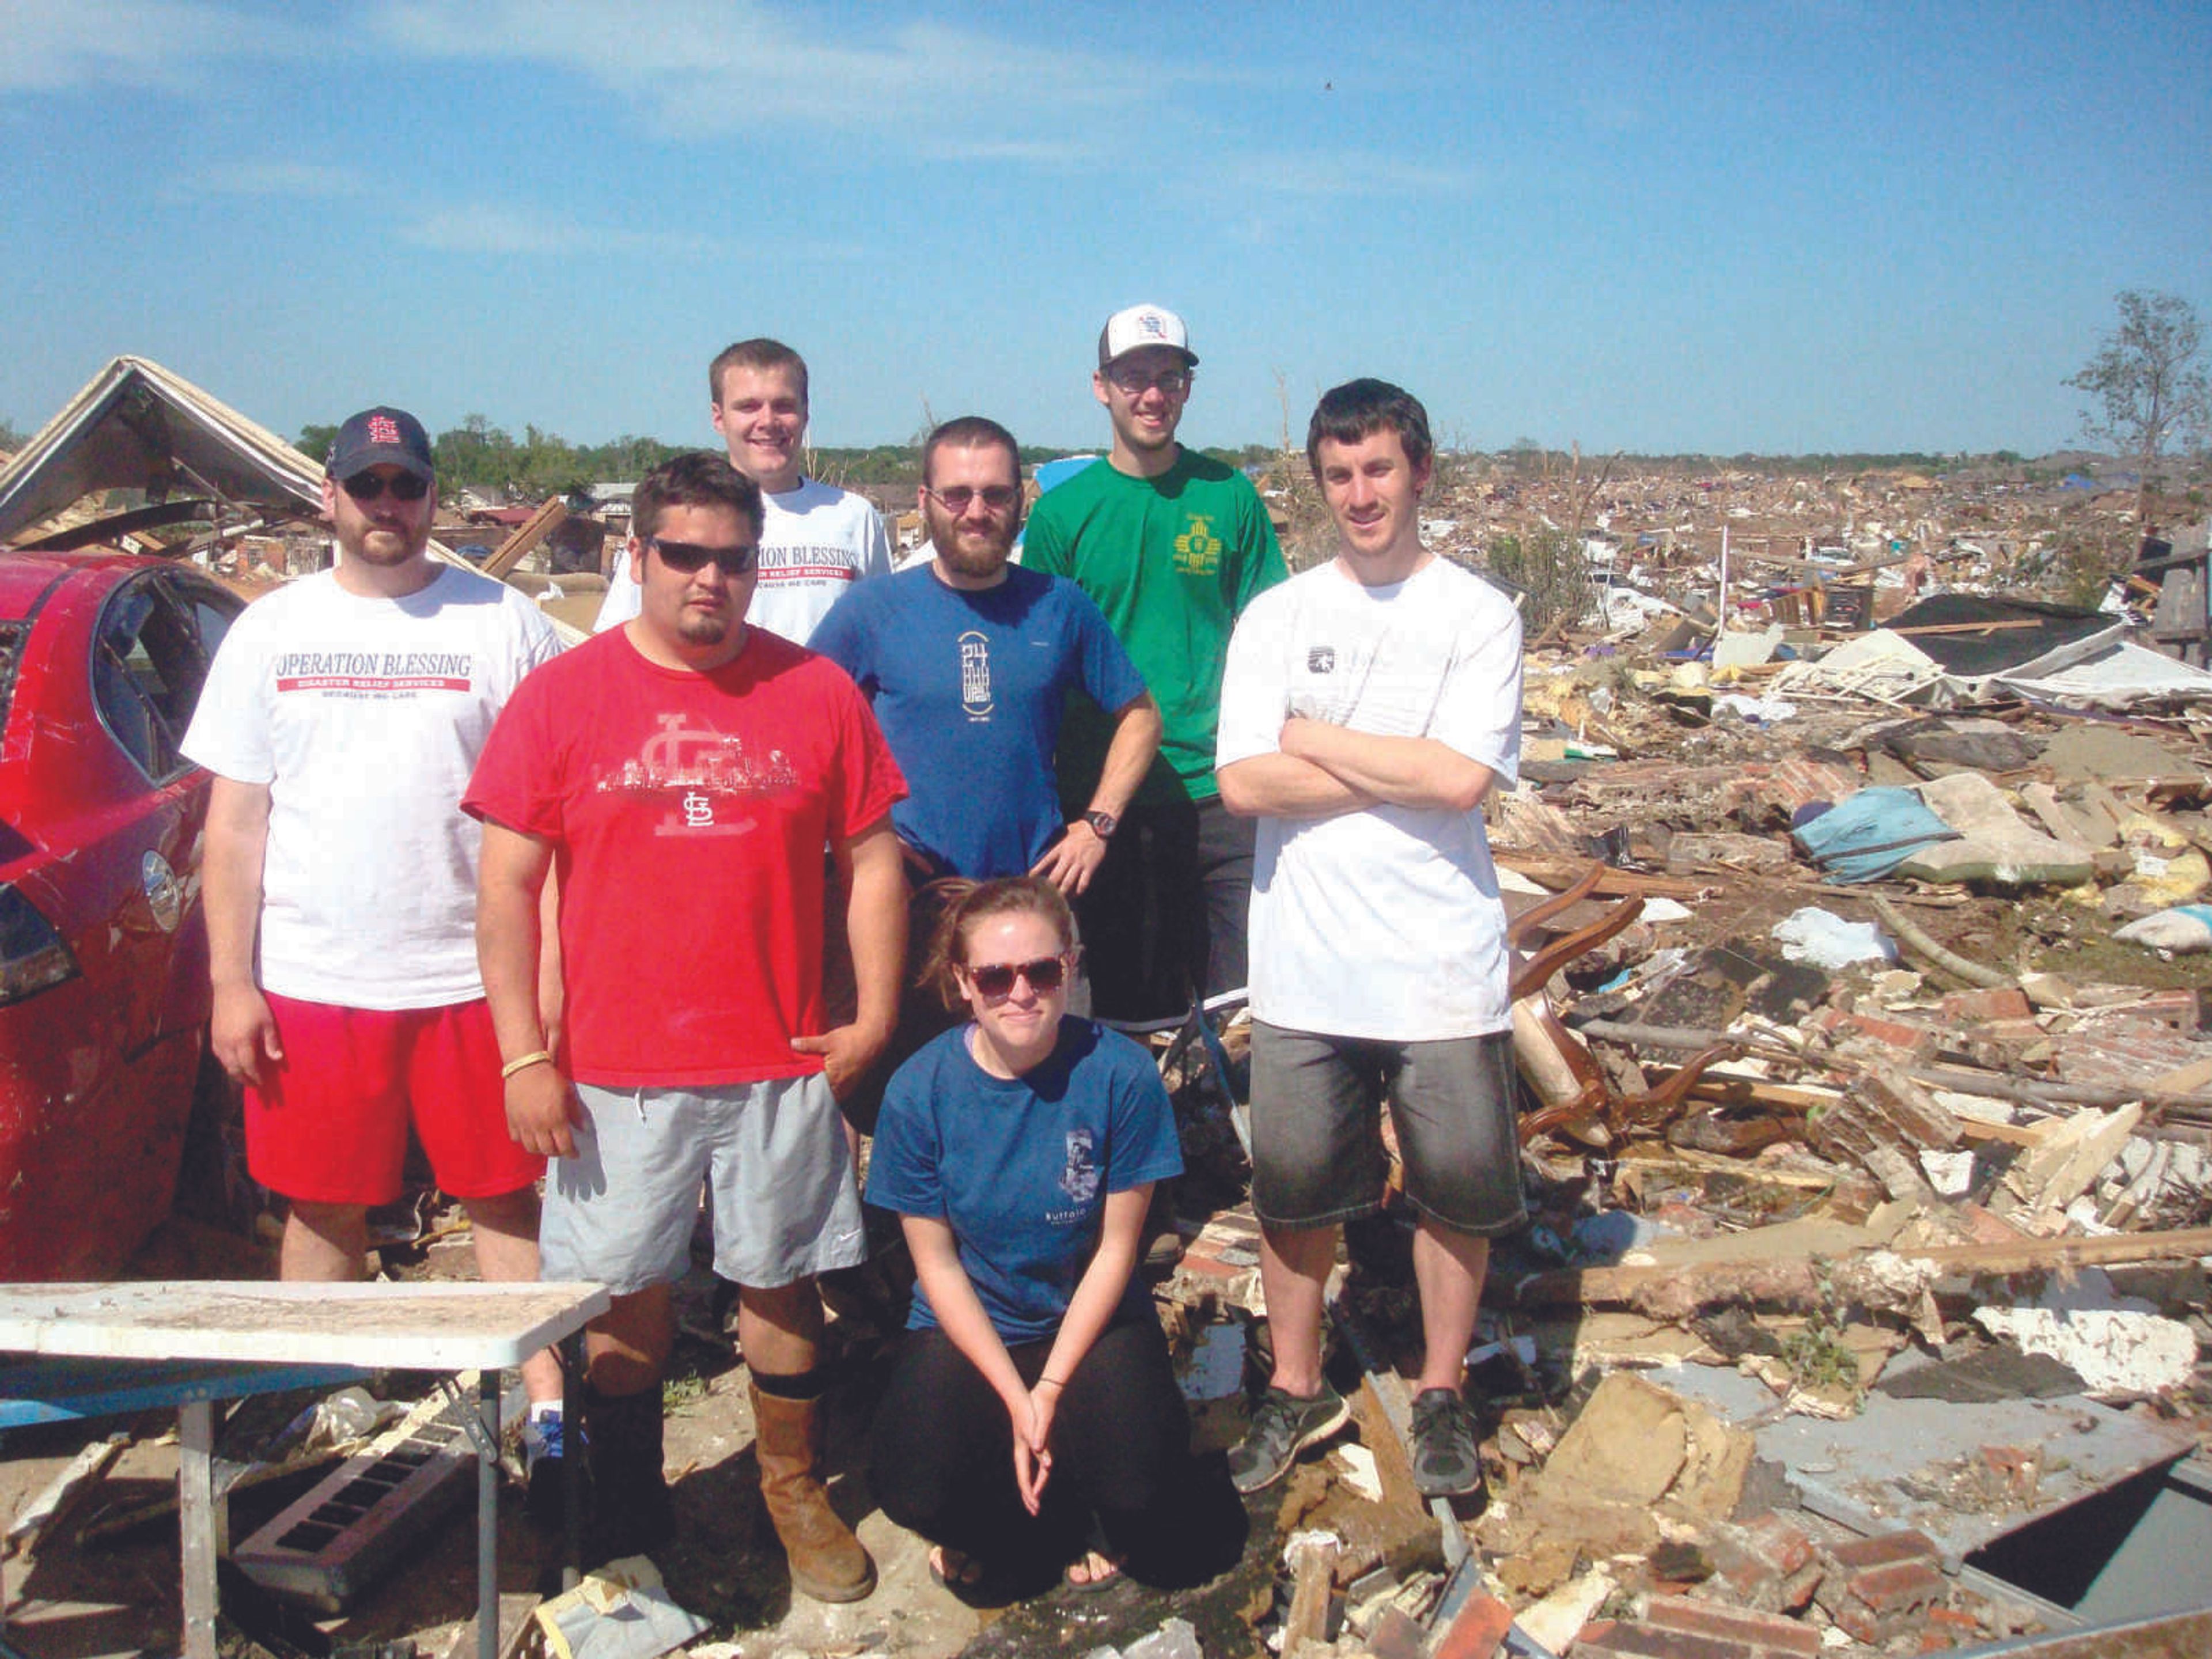 Tom Holman's class takes a detour to help tornado victims in Oklahoma during summer